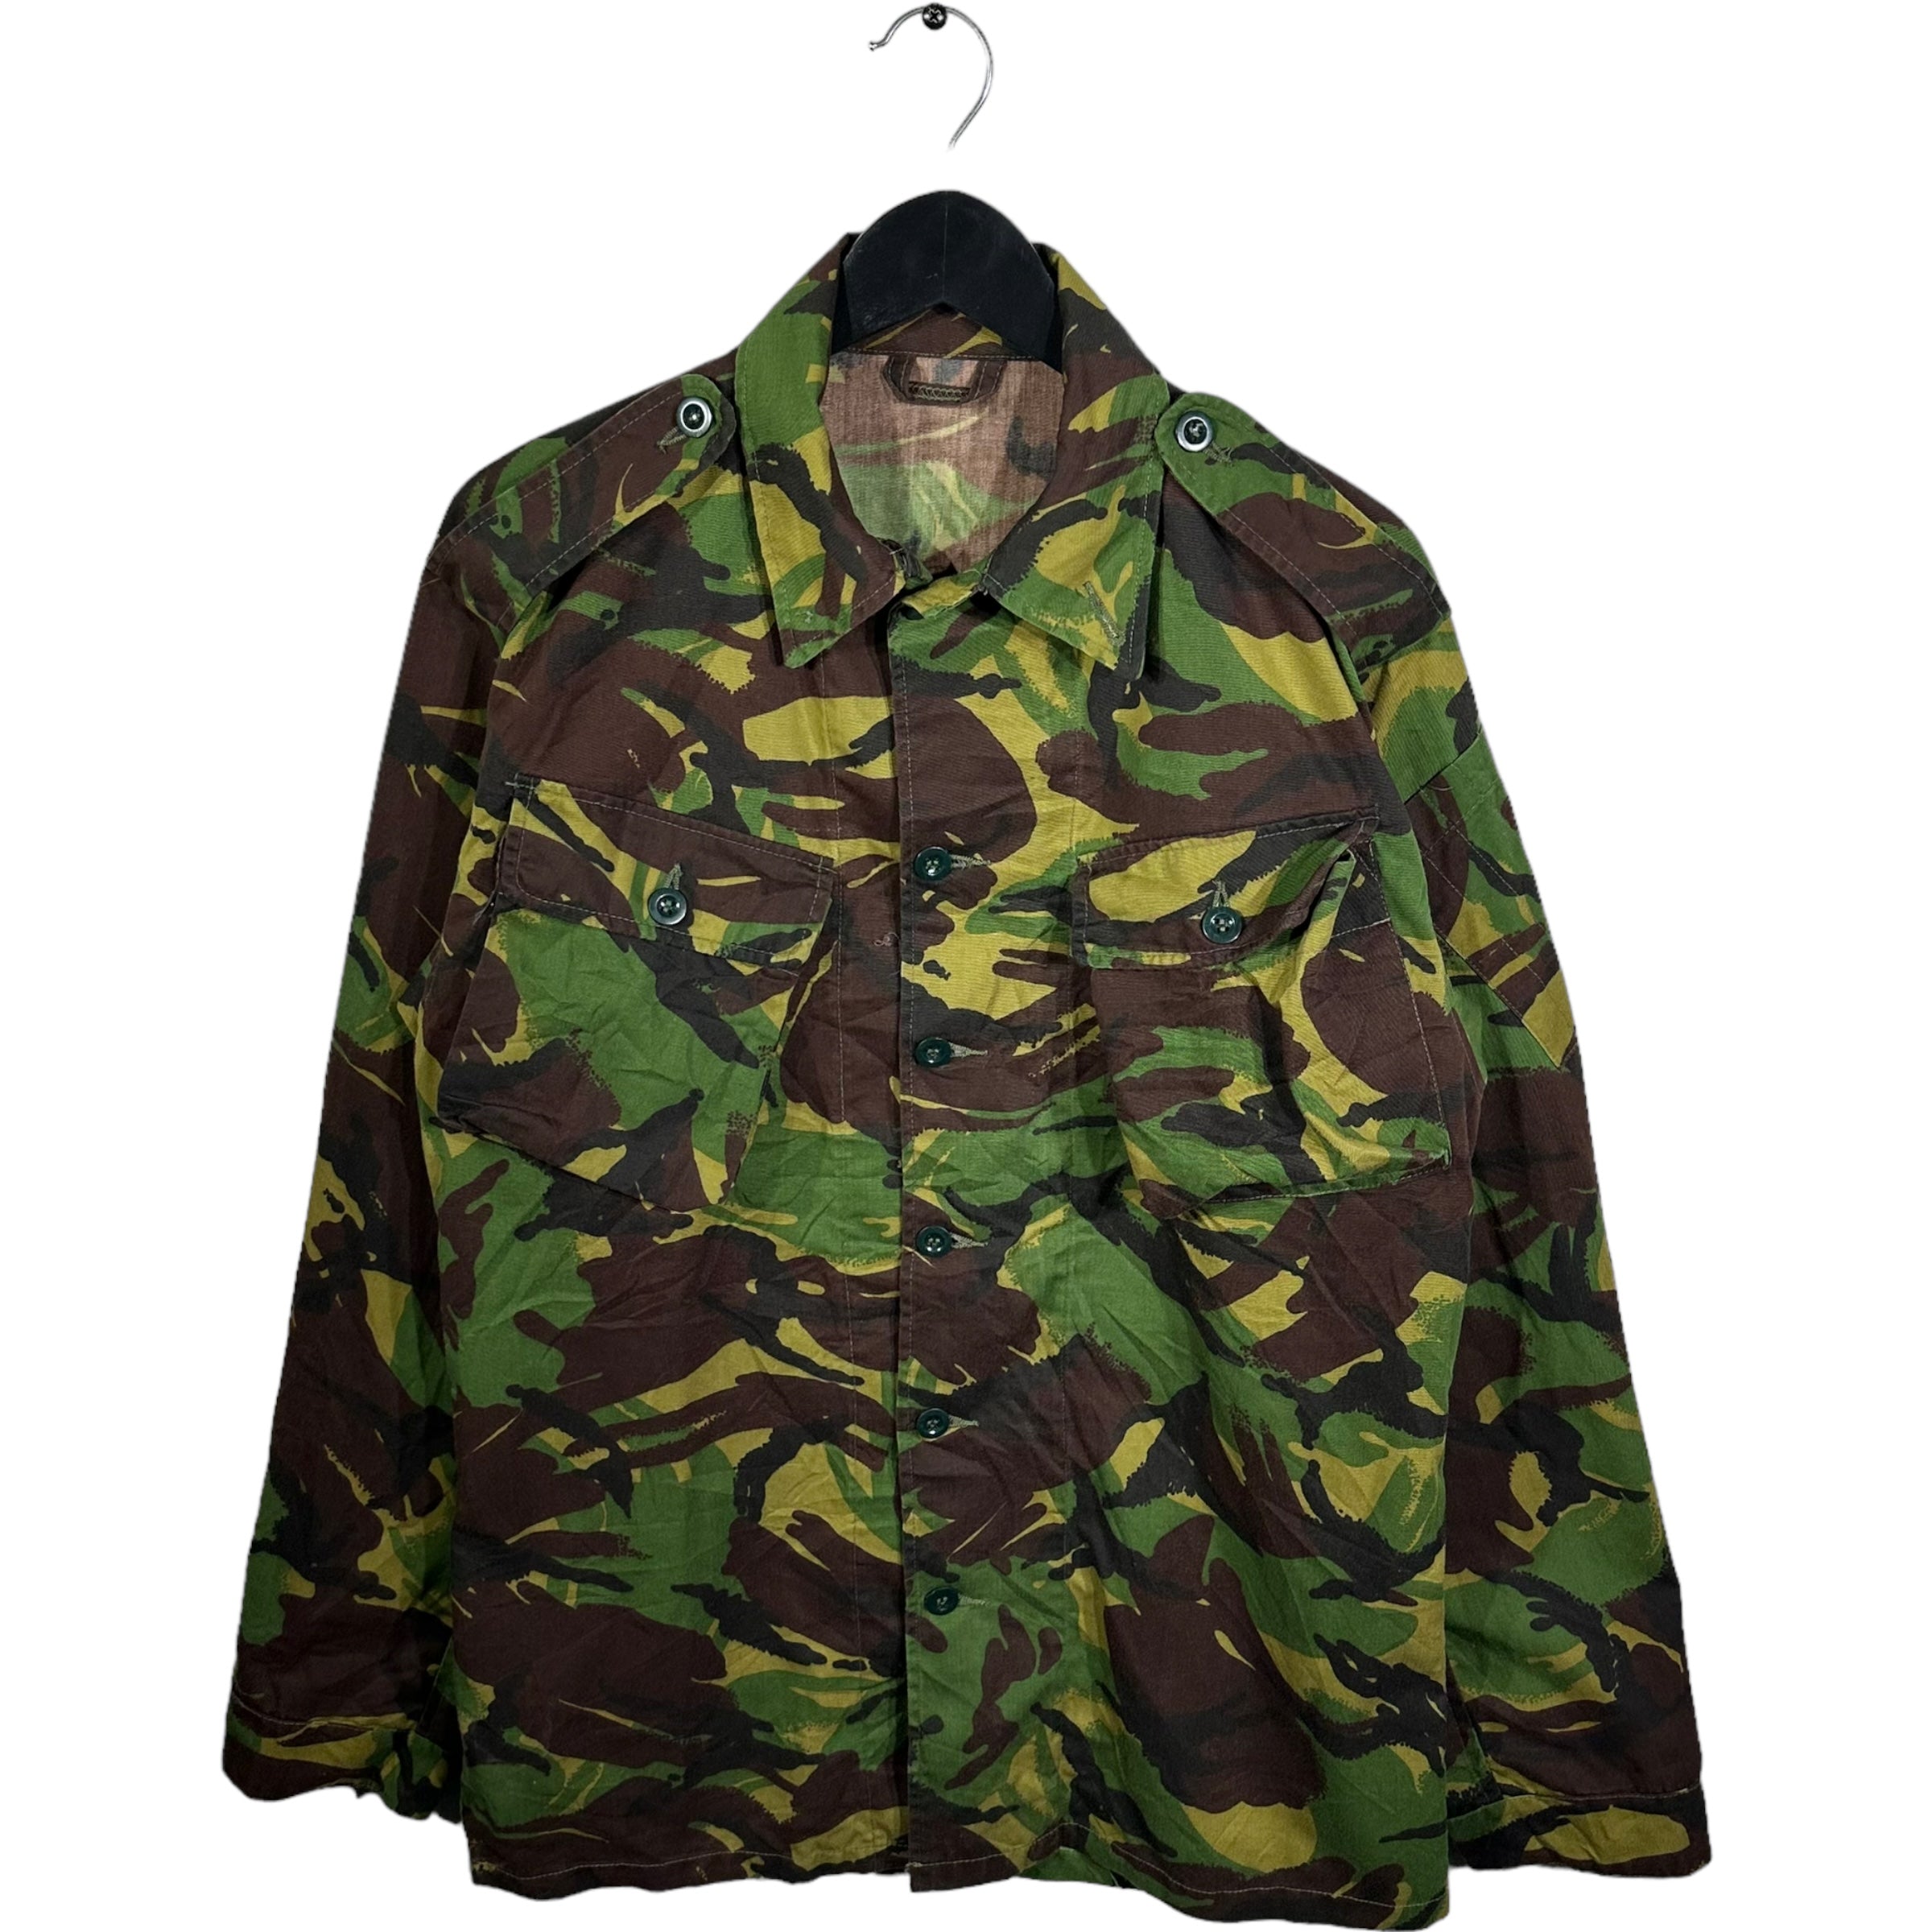 Vintage Military Camo Button Up